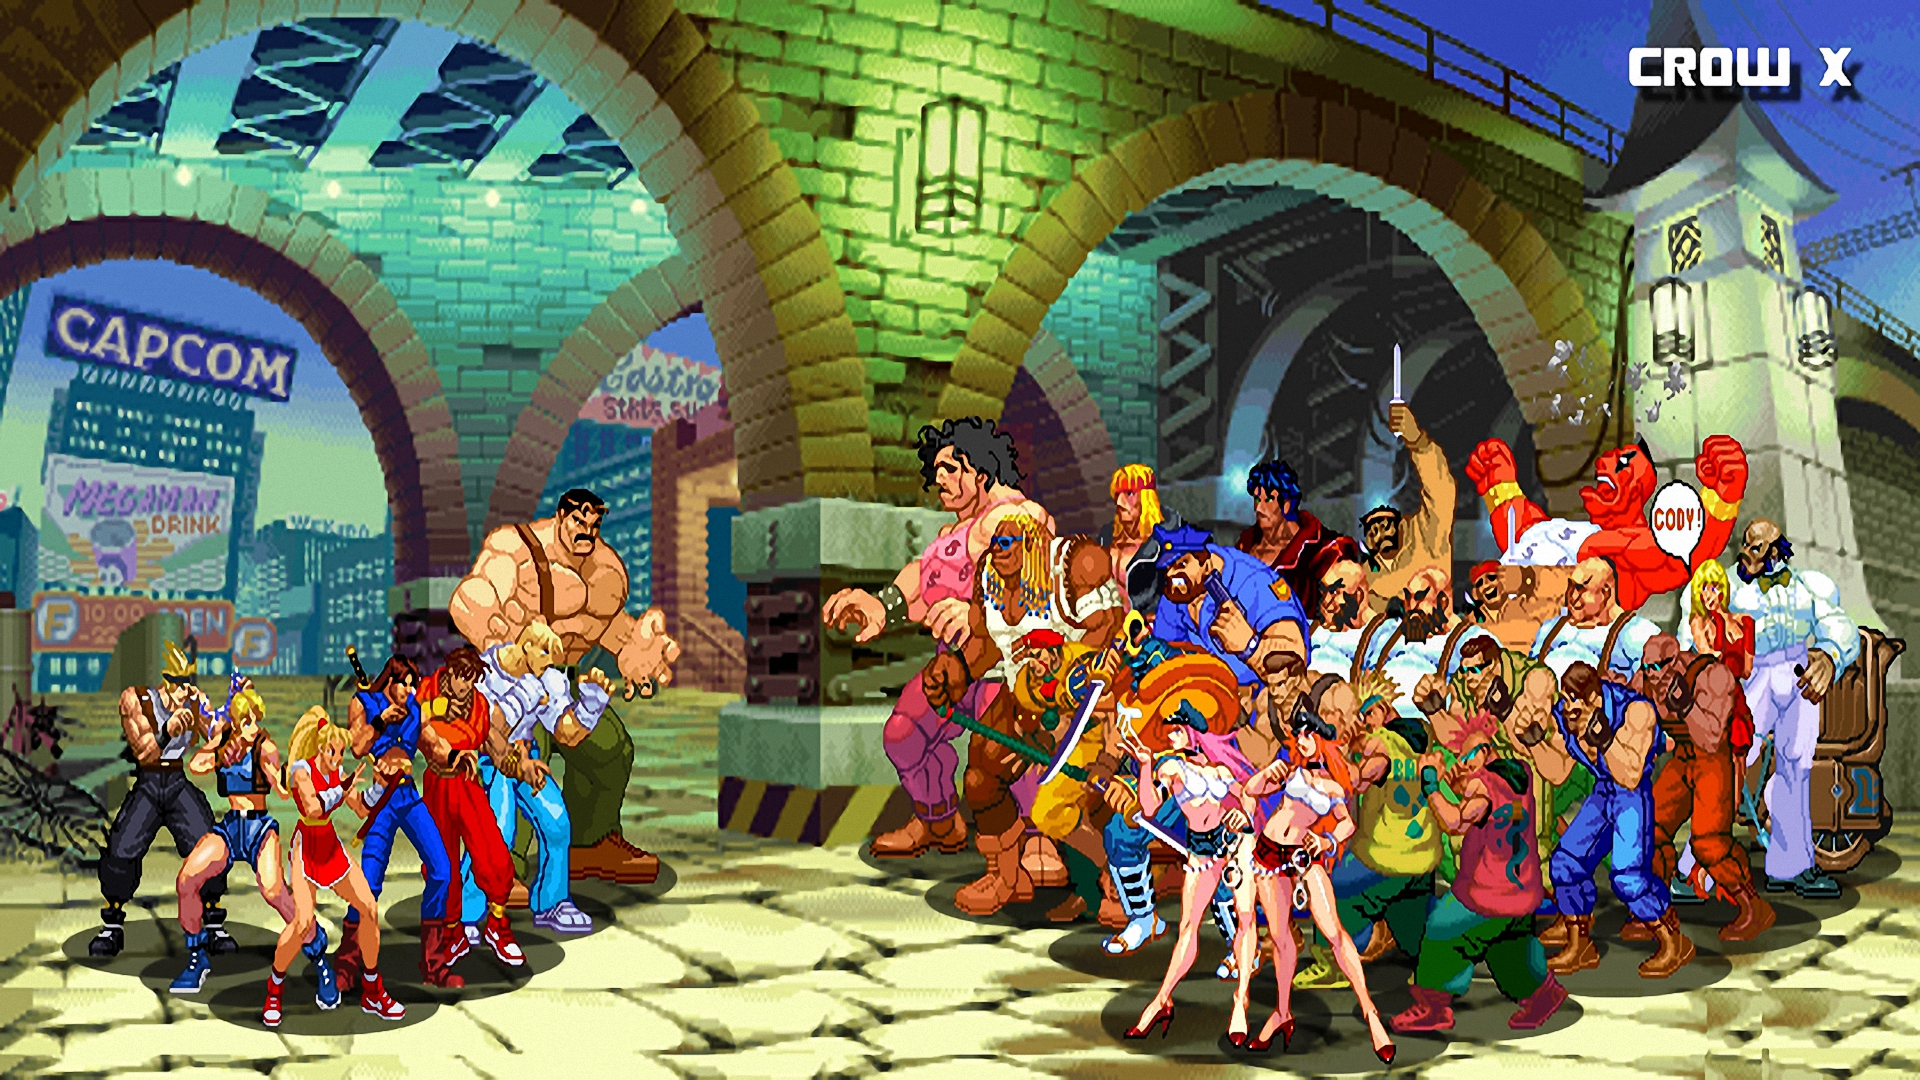 download game final fight 3